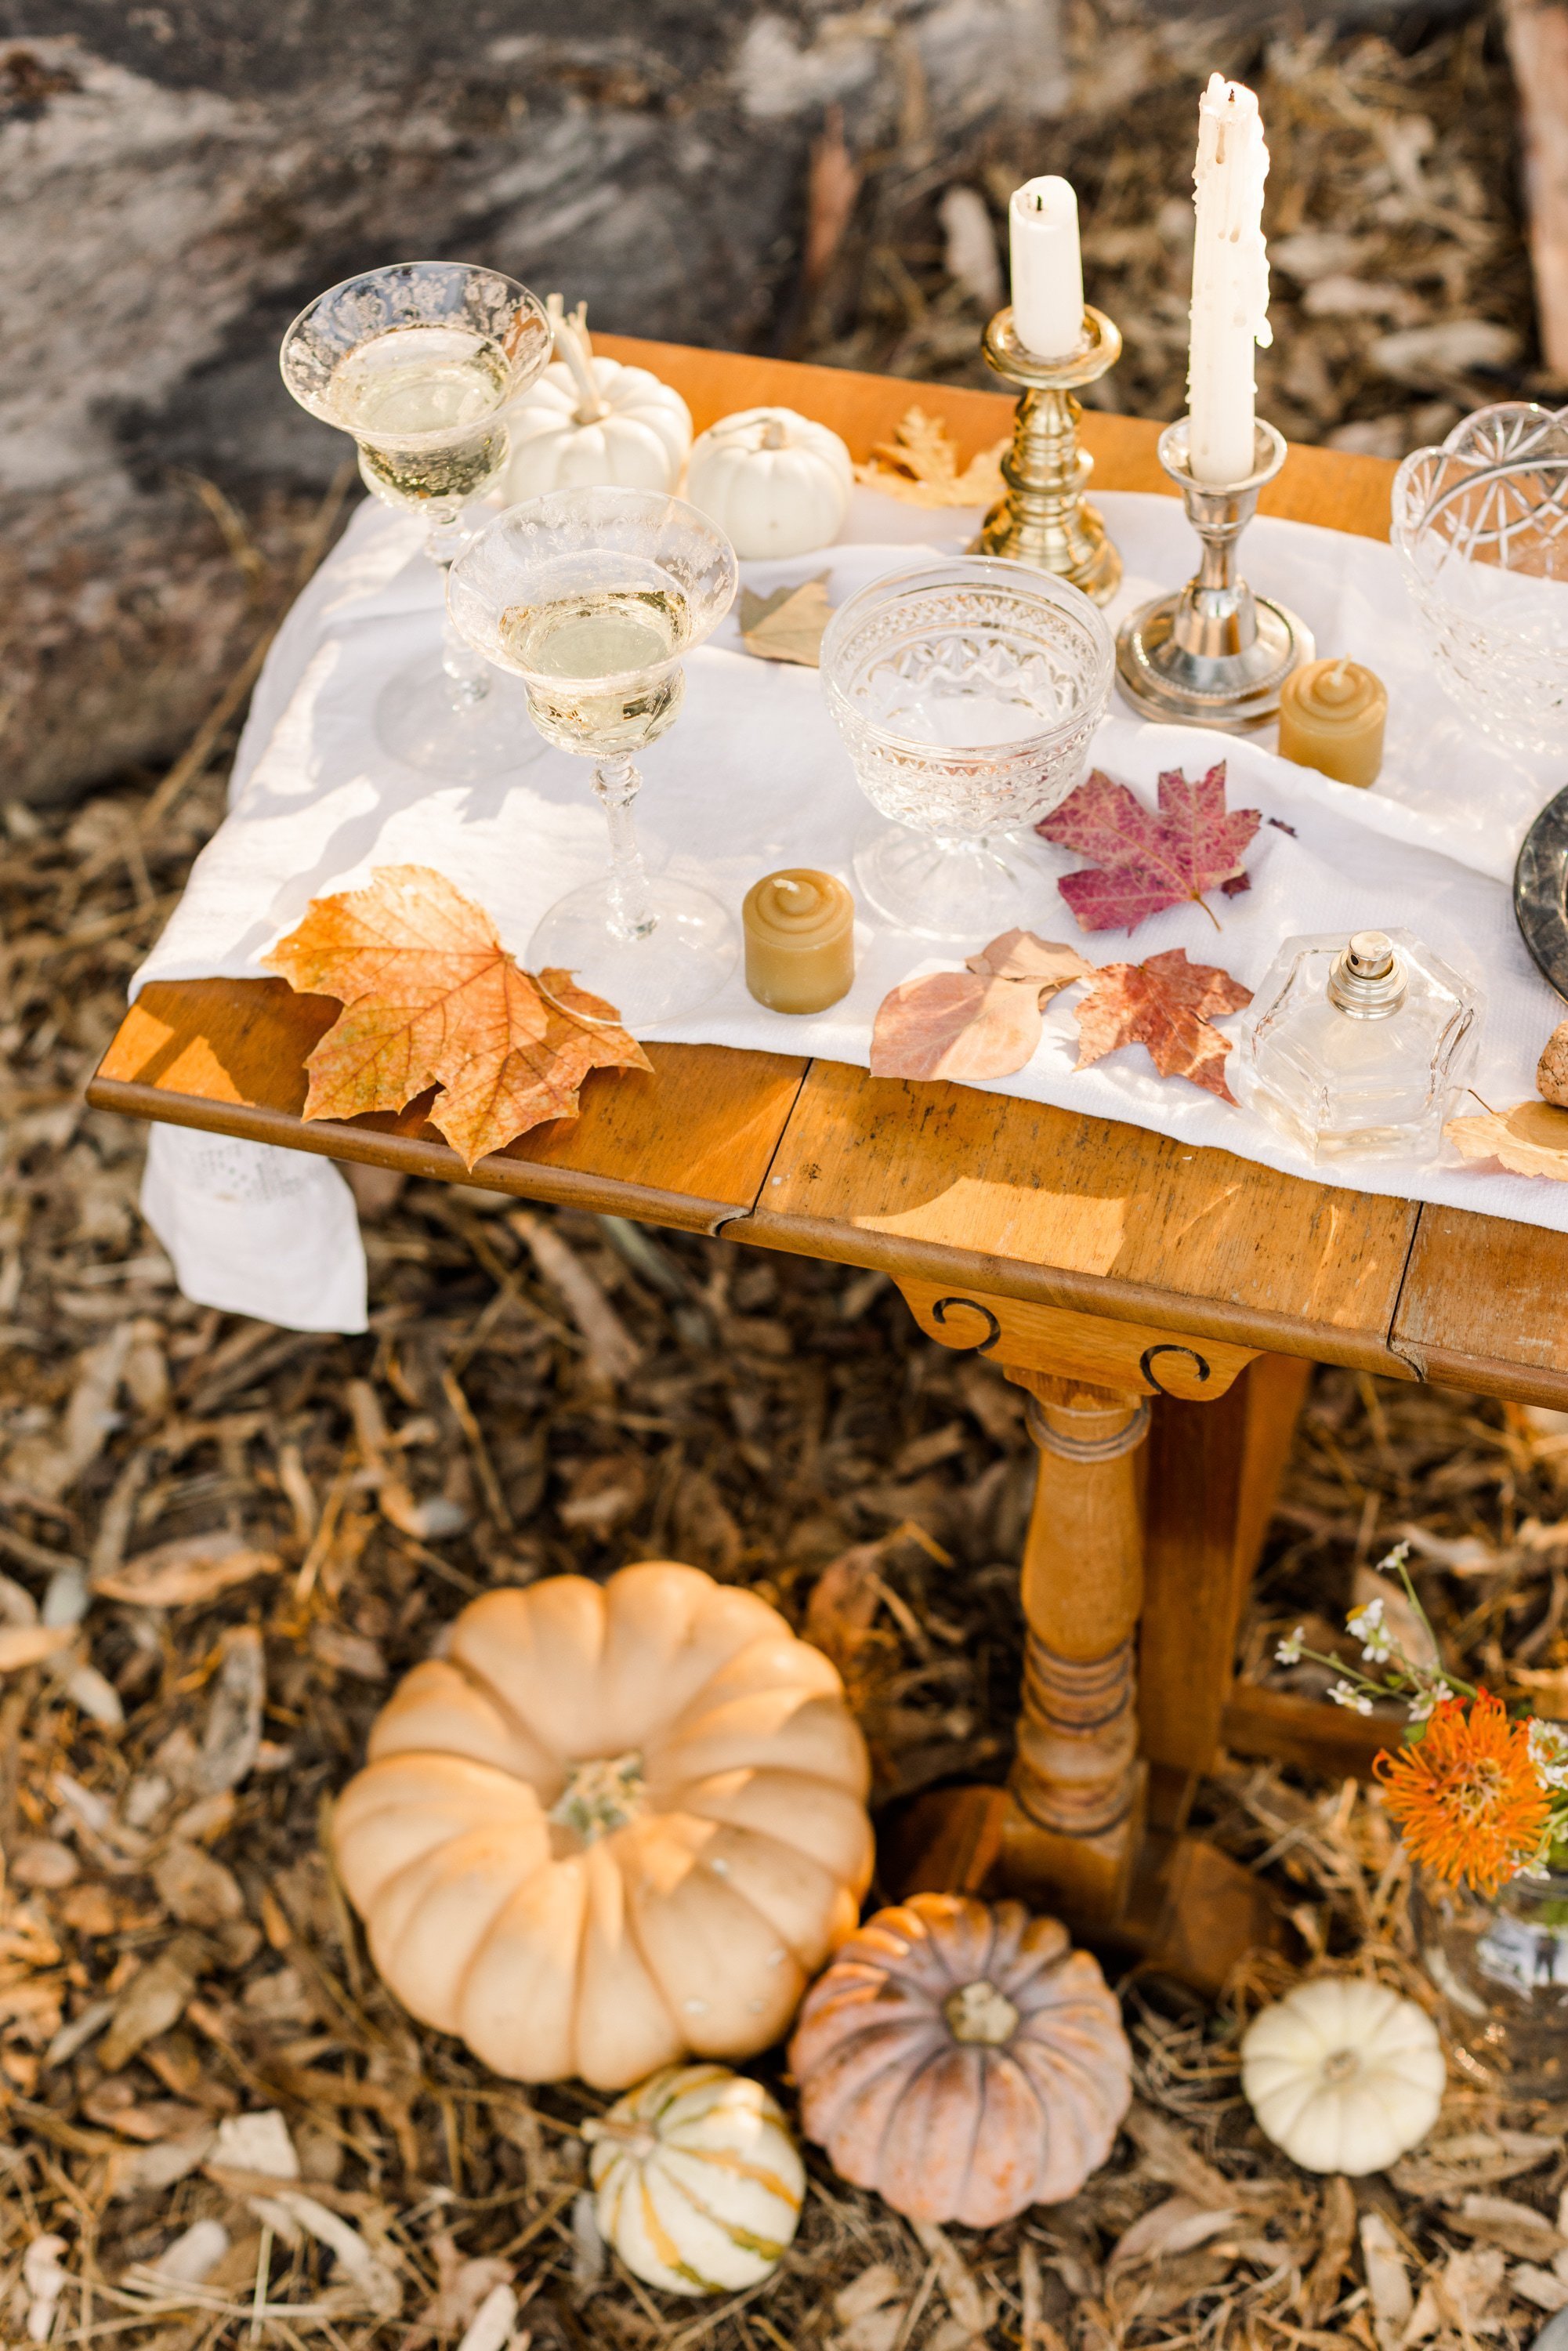 www.santabarbarawedding.com | Veils &amp; Tails Photography | Styled Shoot with Pumpkins, Leaves and Other Fall Details on Reception Table